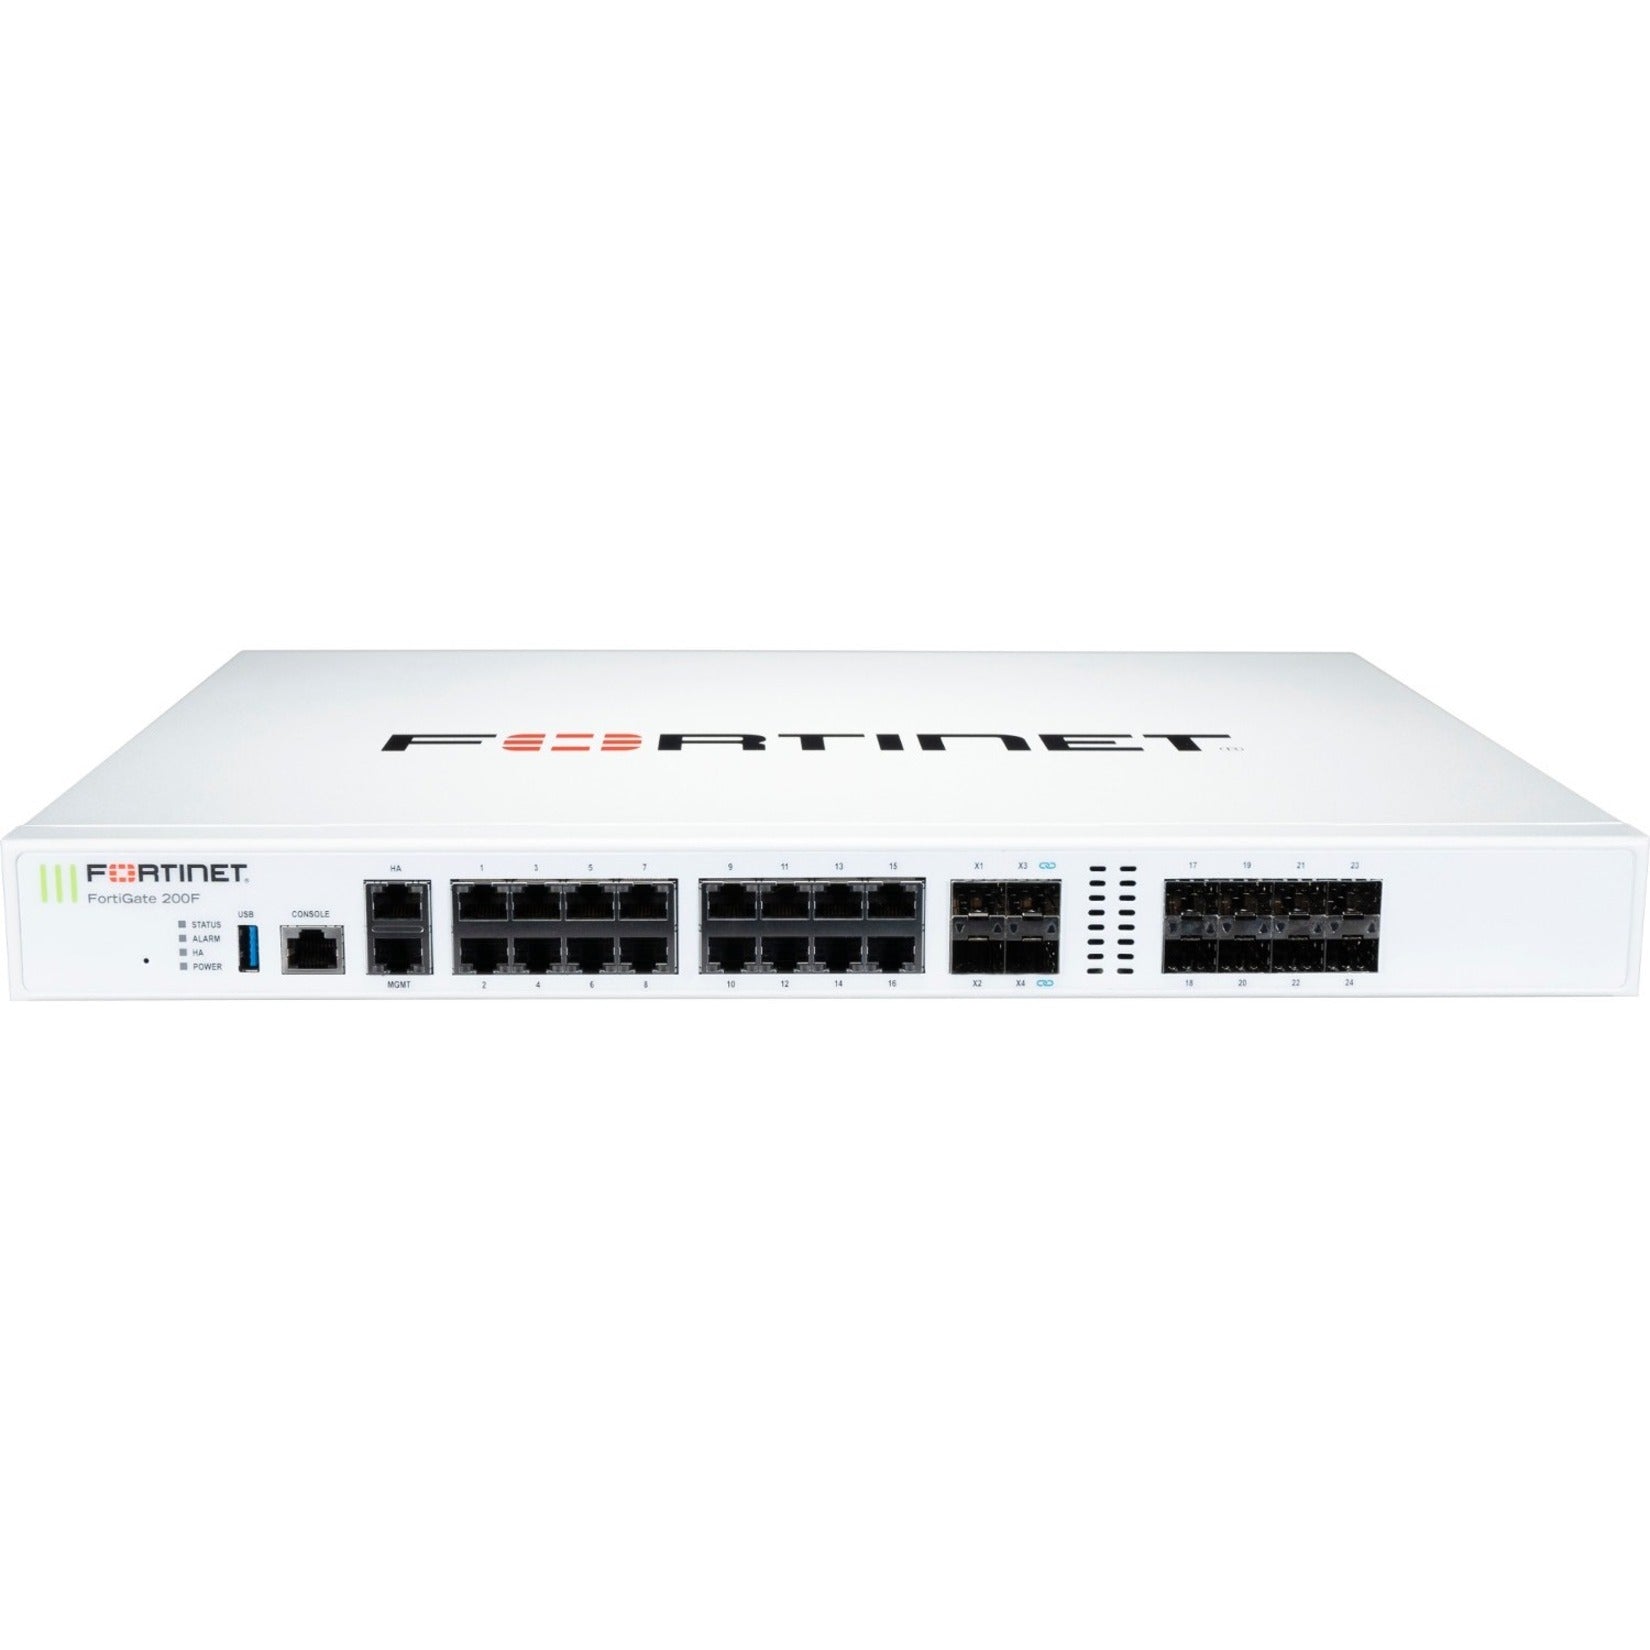 Fortinet FG-200F-BDL-950-36 FortiGate FG-200F Network Security/Firewall Appliance, 3Y-24X7 FortiCare and FortiGuard UTP